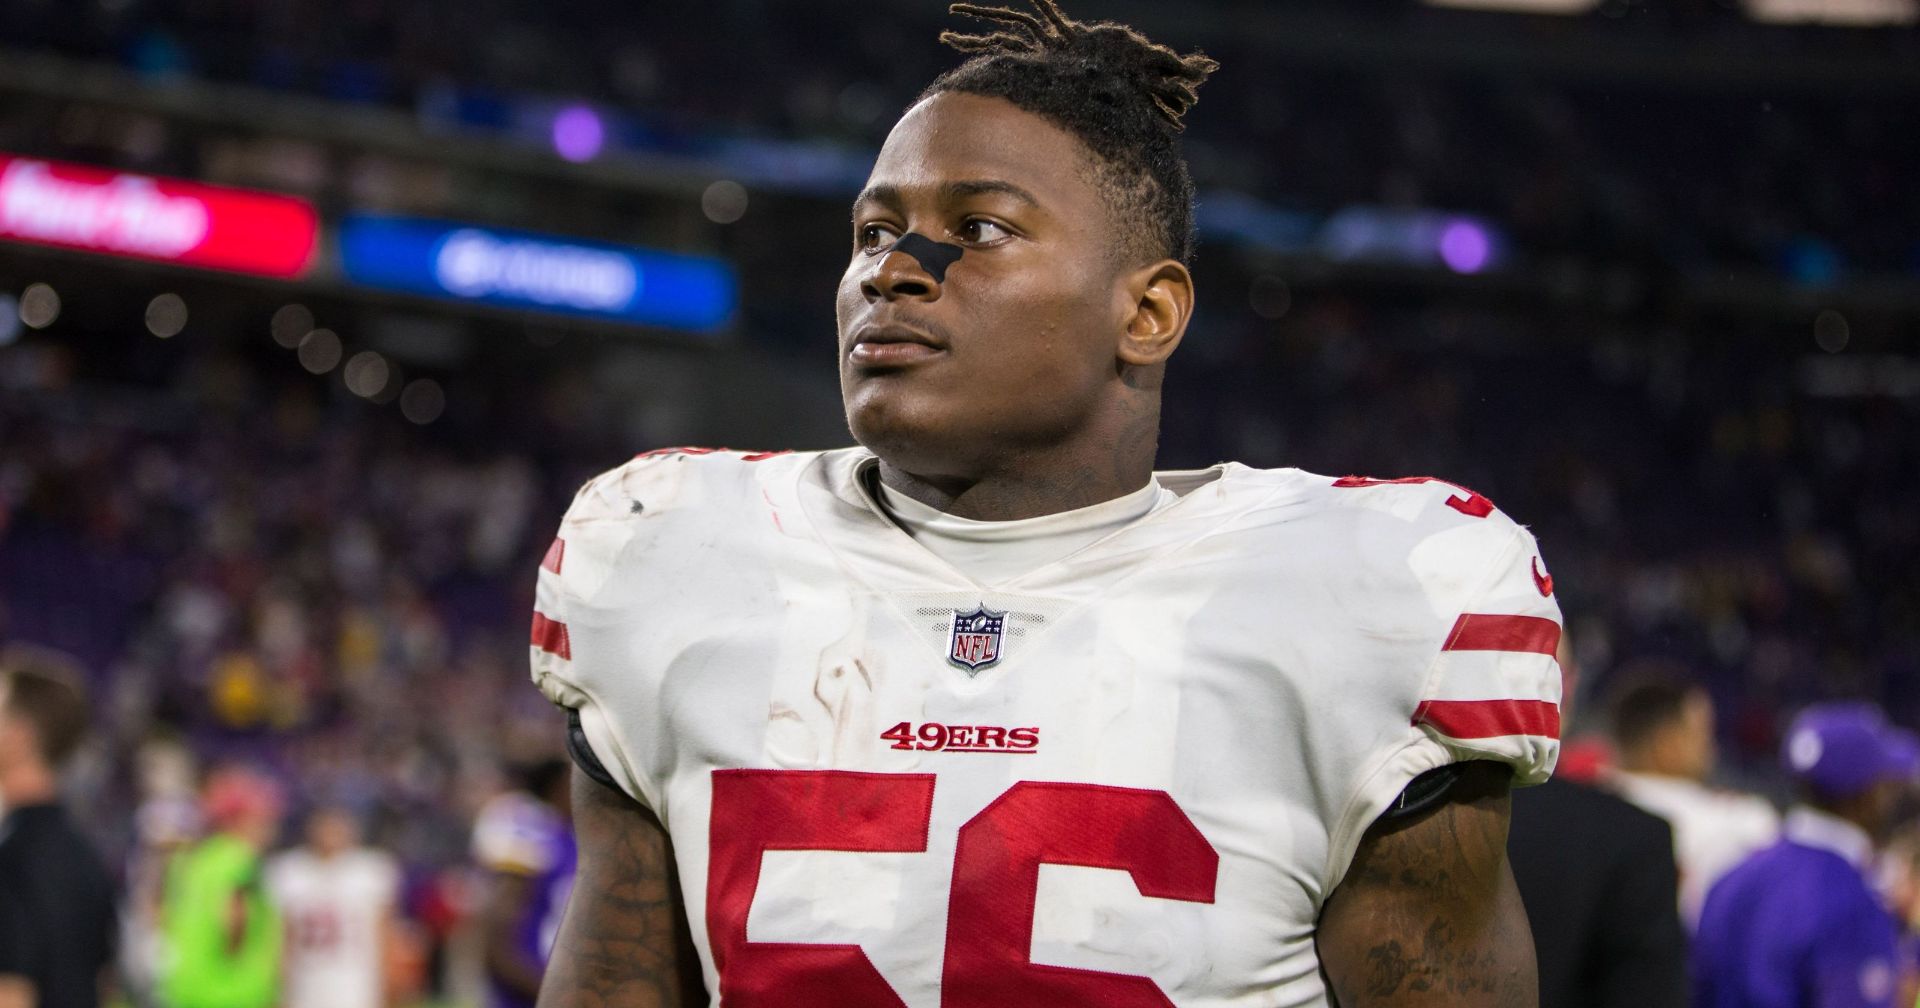 Reuben Foster for domestic abuse charges